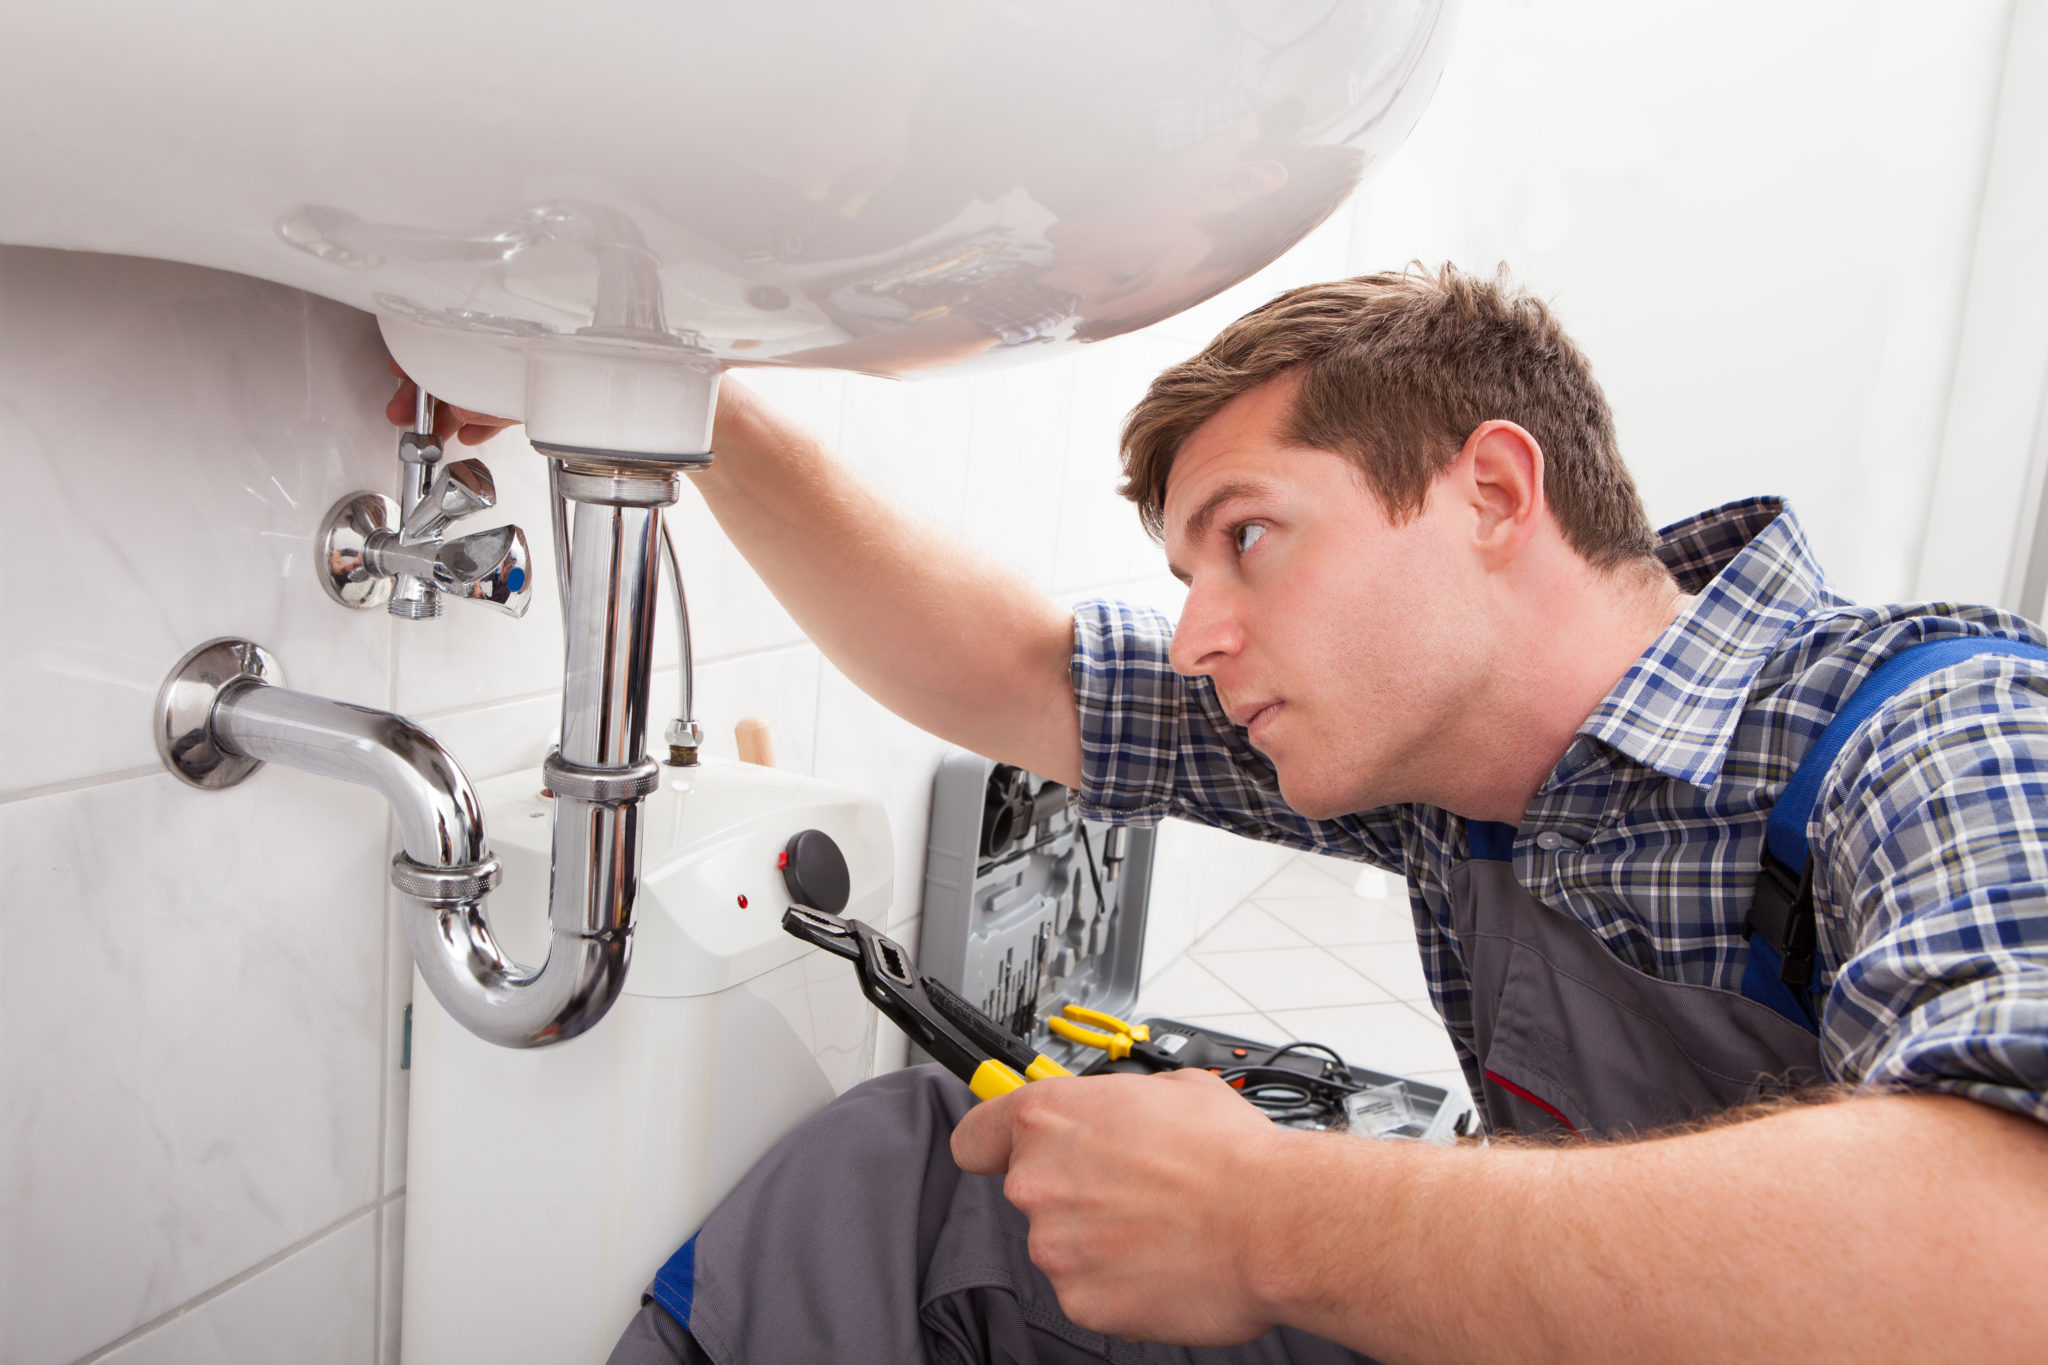 Bethlehem Plumber Working on Installation and Other Services in Allentown PA House